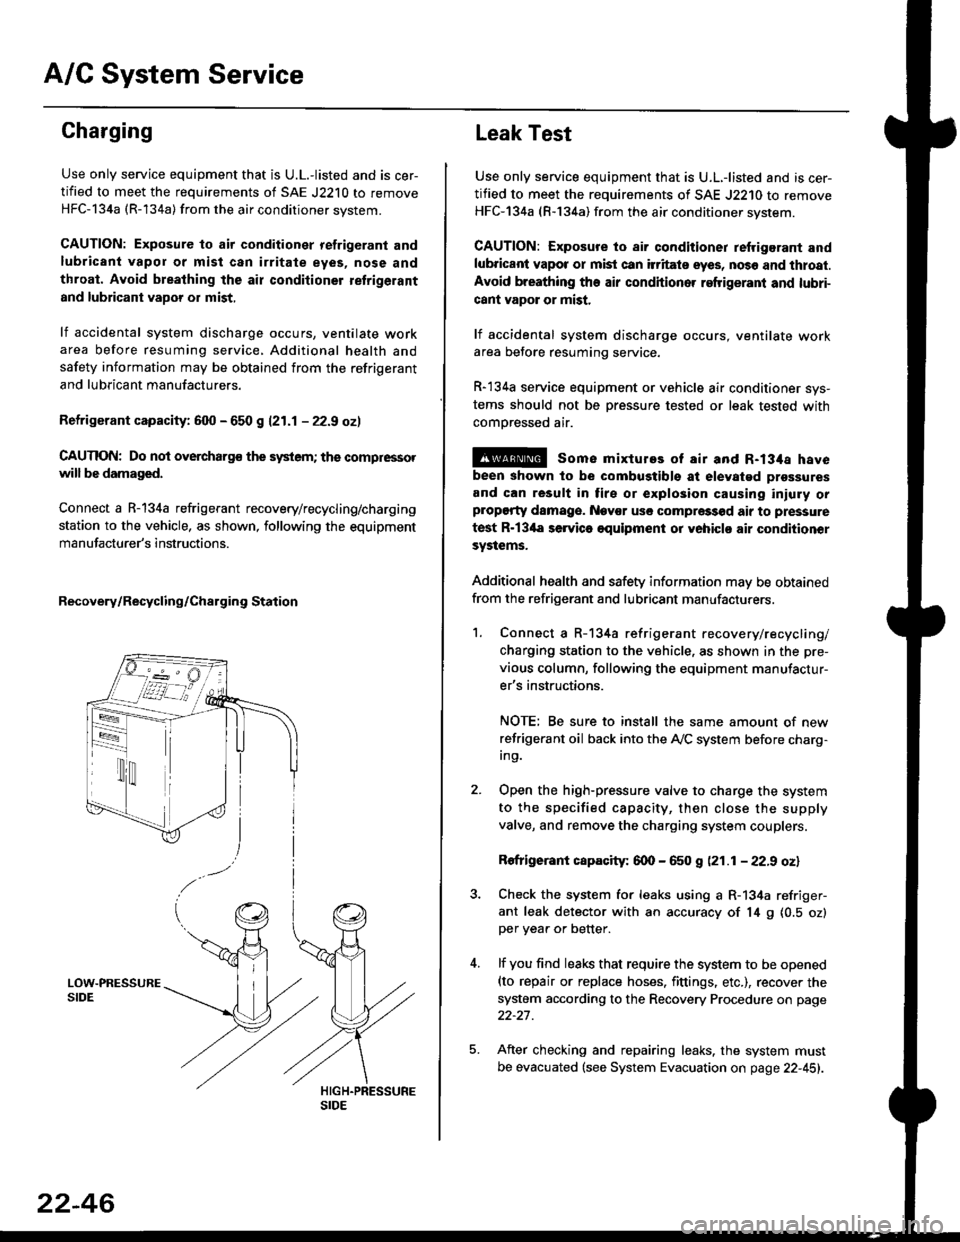 HONDA CIVIC 1996 6.G Owners Manual A/C System Service
Charging
Use only service equipment that is U.L.-listed and is cer-
tified to meet the requirements of SAE J2210 to remove
HFC-134a (R-134a) from the air conditioner system.
CAUTION